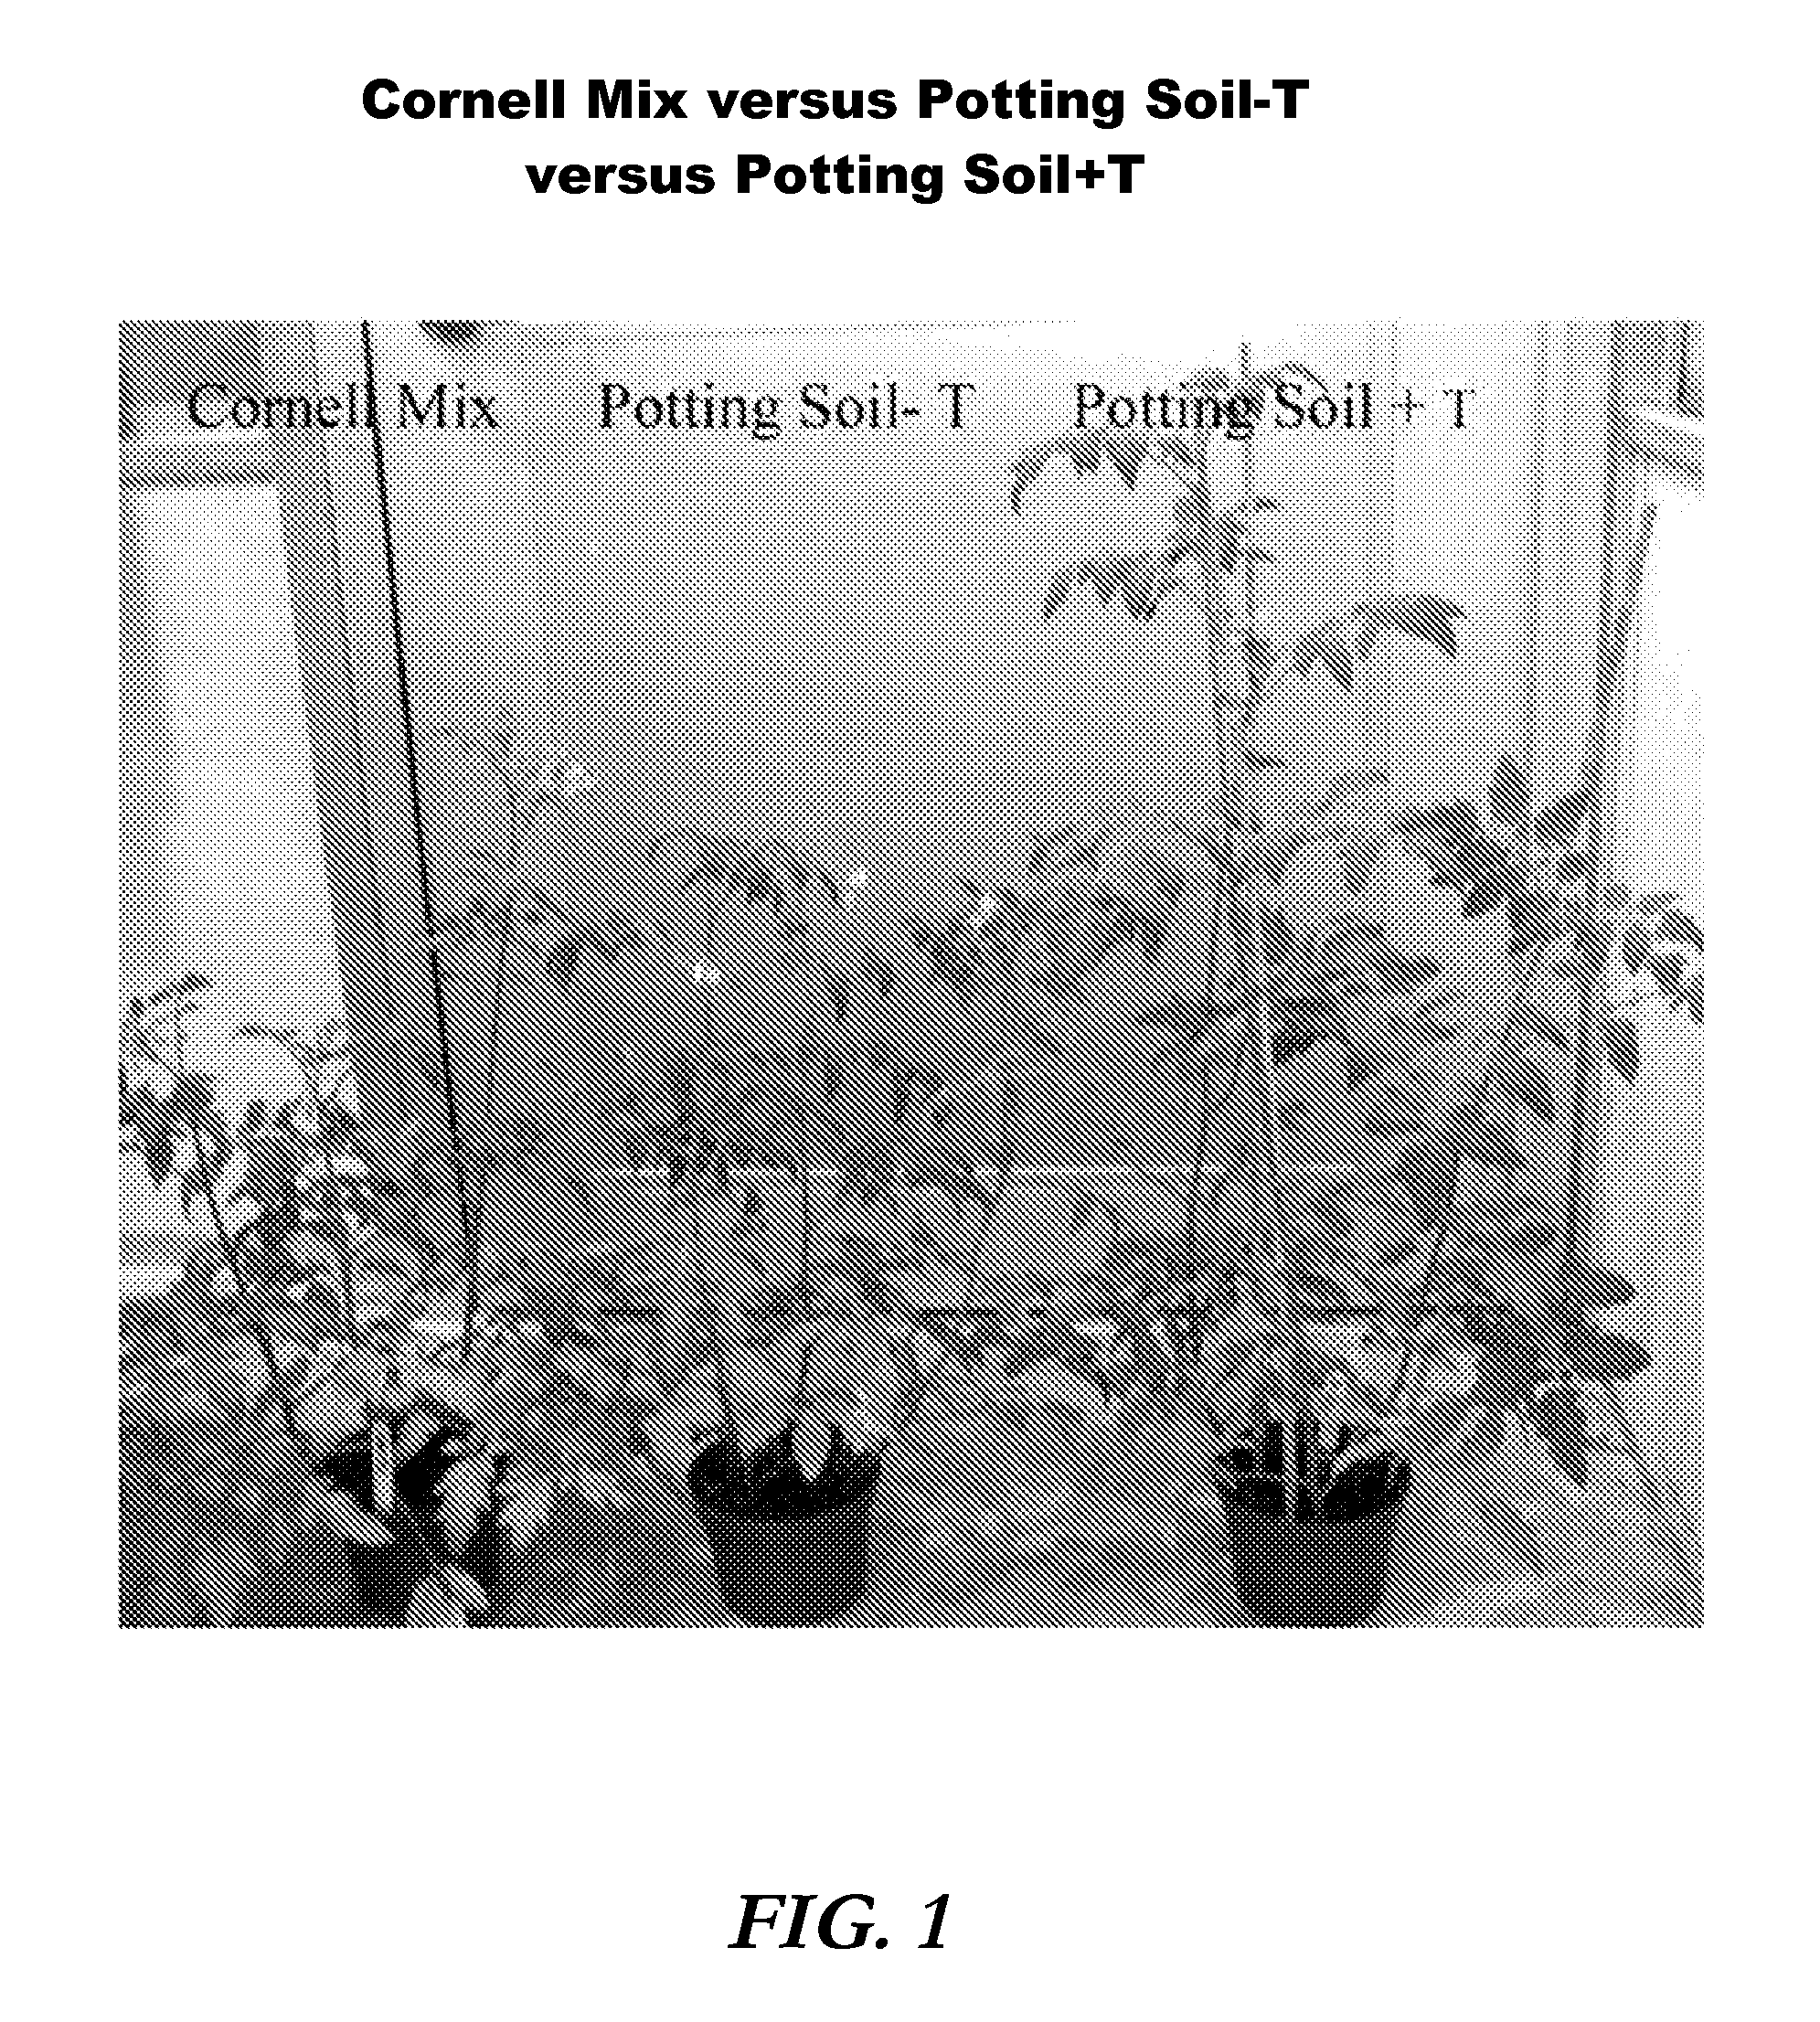 Plant propagation medium and methods of making and using it